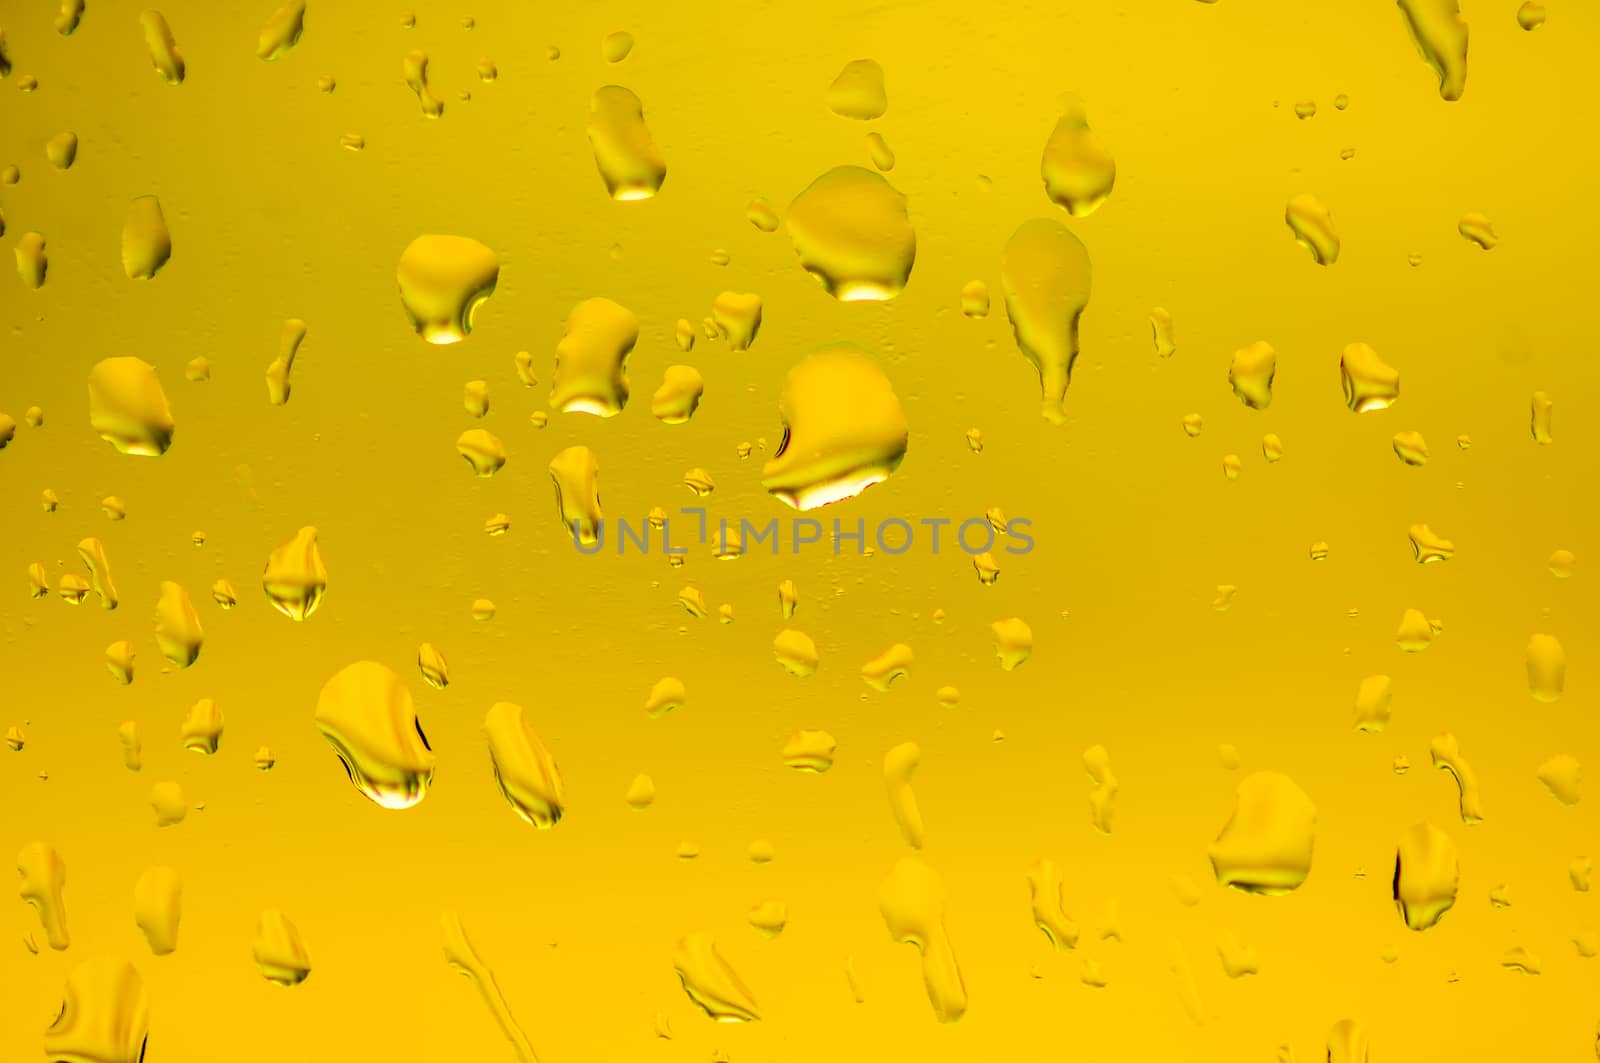 Drops of water on glass gold color.